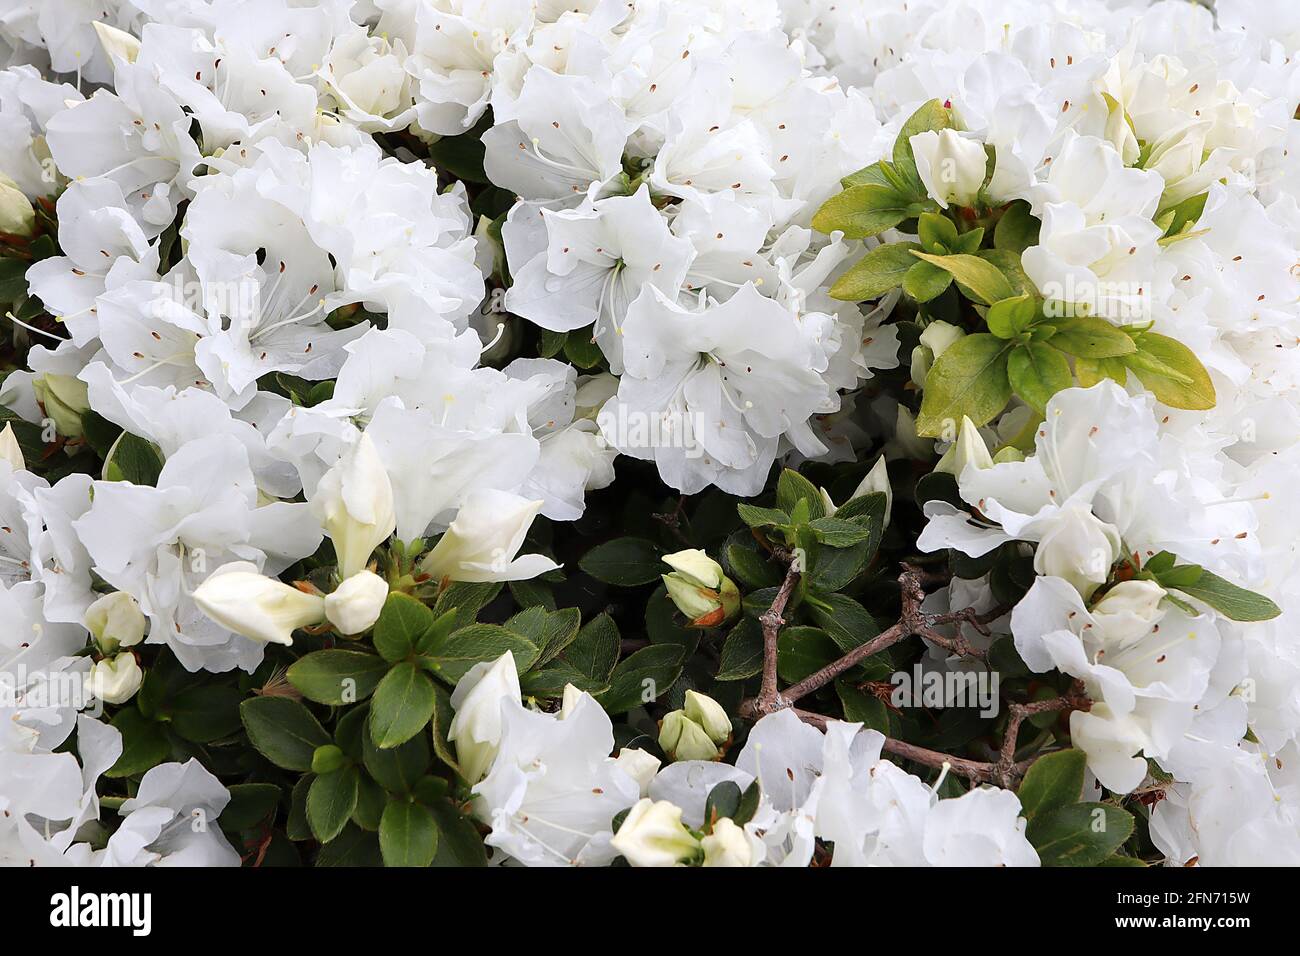 Azalea / Rhododendron ‘Luzi’ Mass of white funnel-shaped flowers and small leaves,  May, England, UK Stock Photo